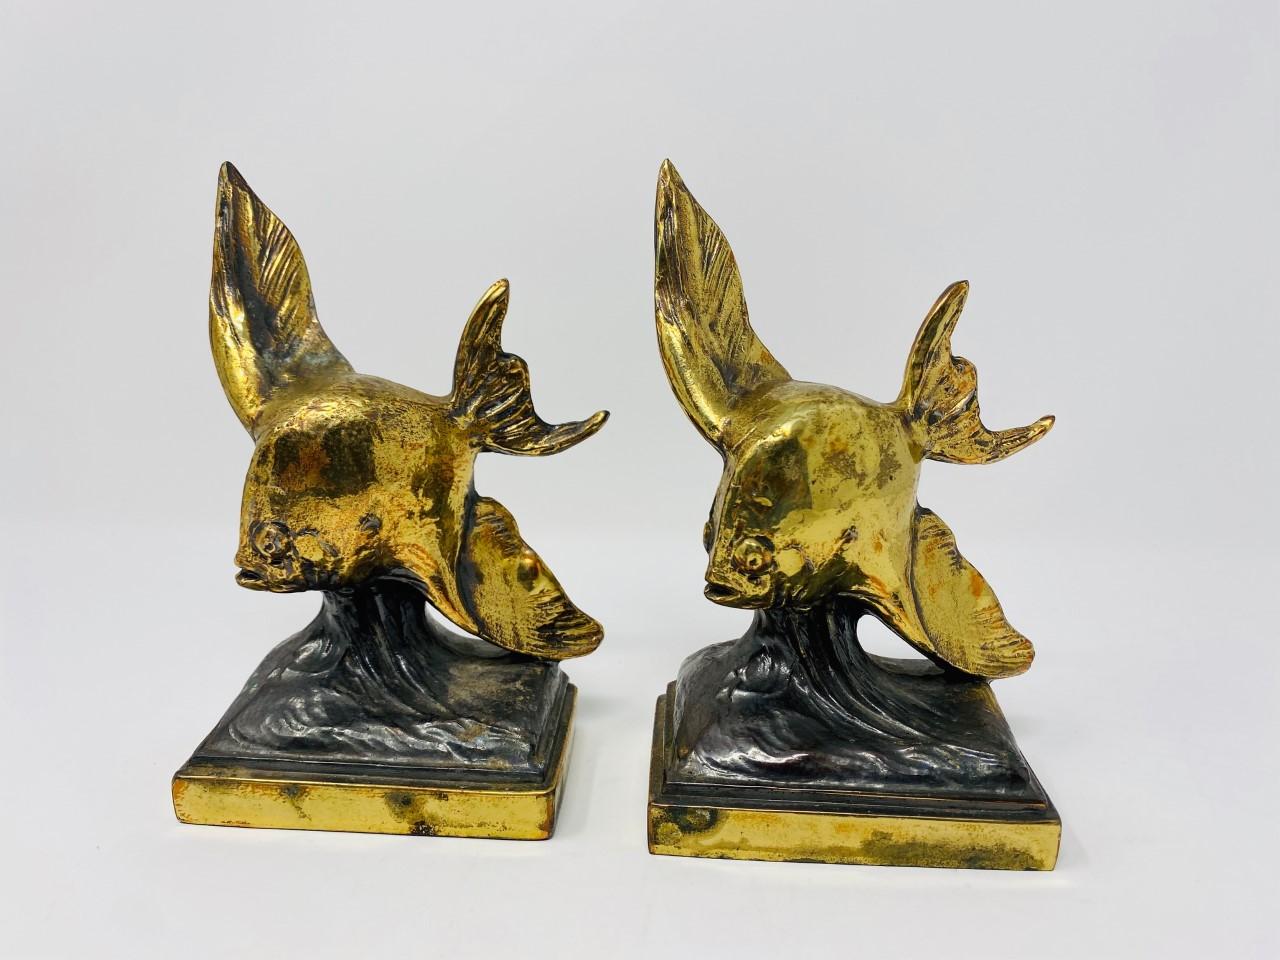 Vintage Rare Pair of Brass Flying Fish Bookends, 1930s For Sale 3